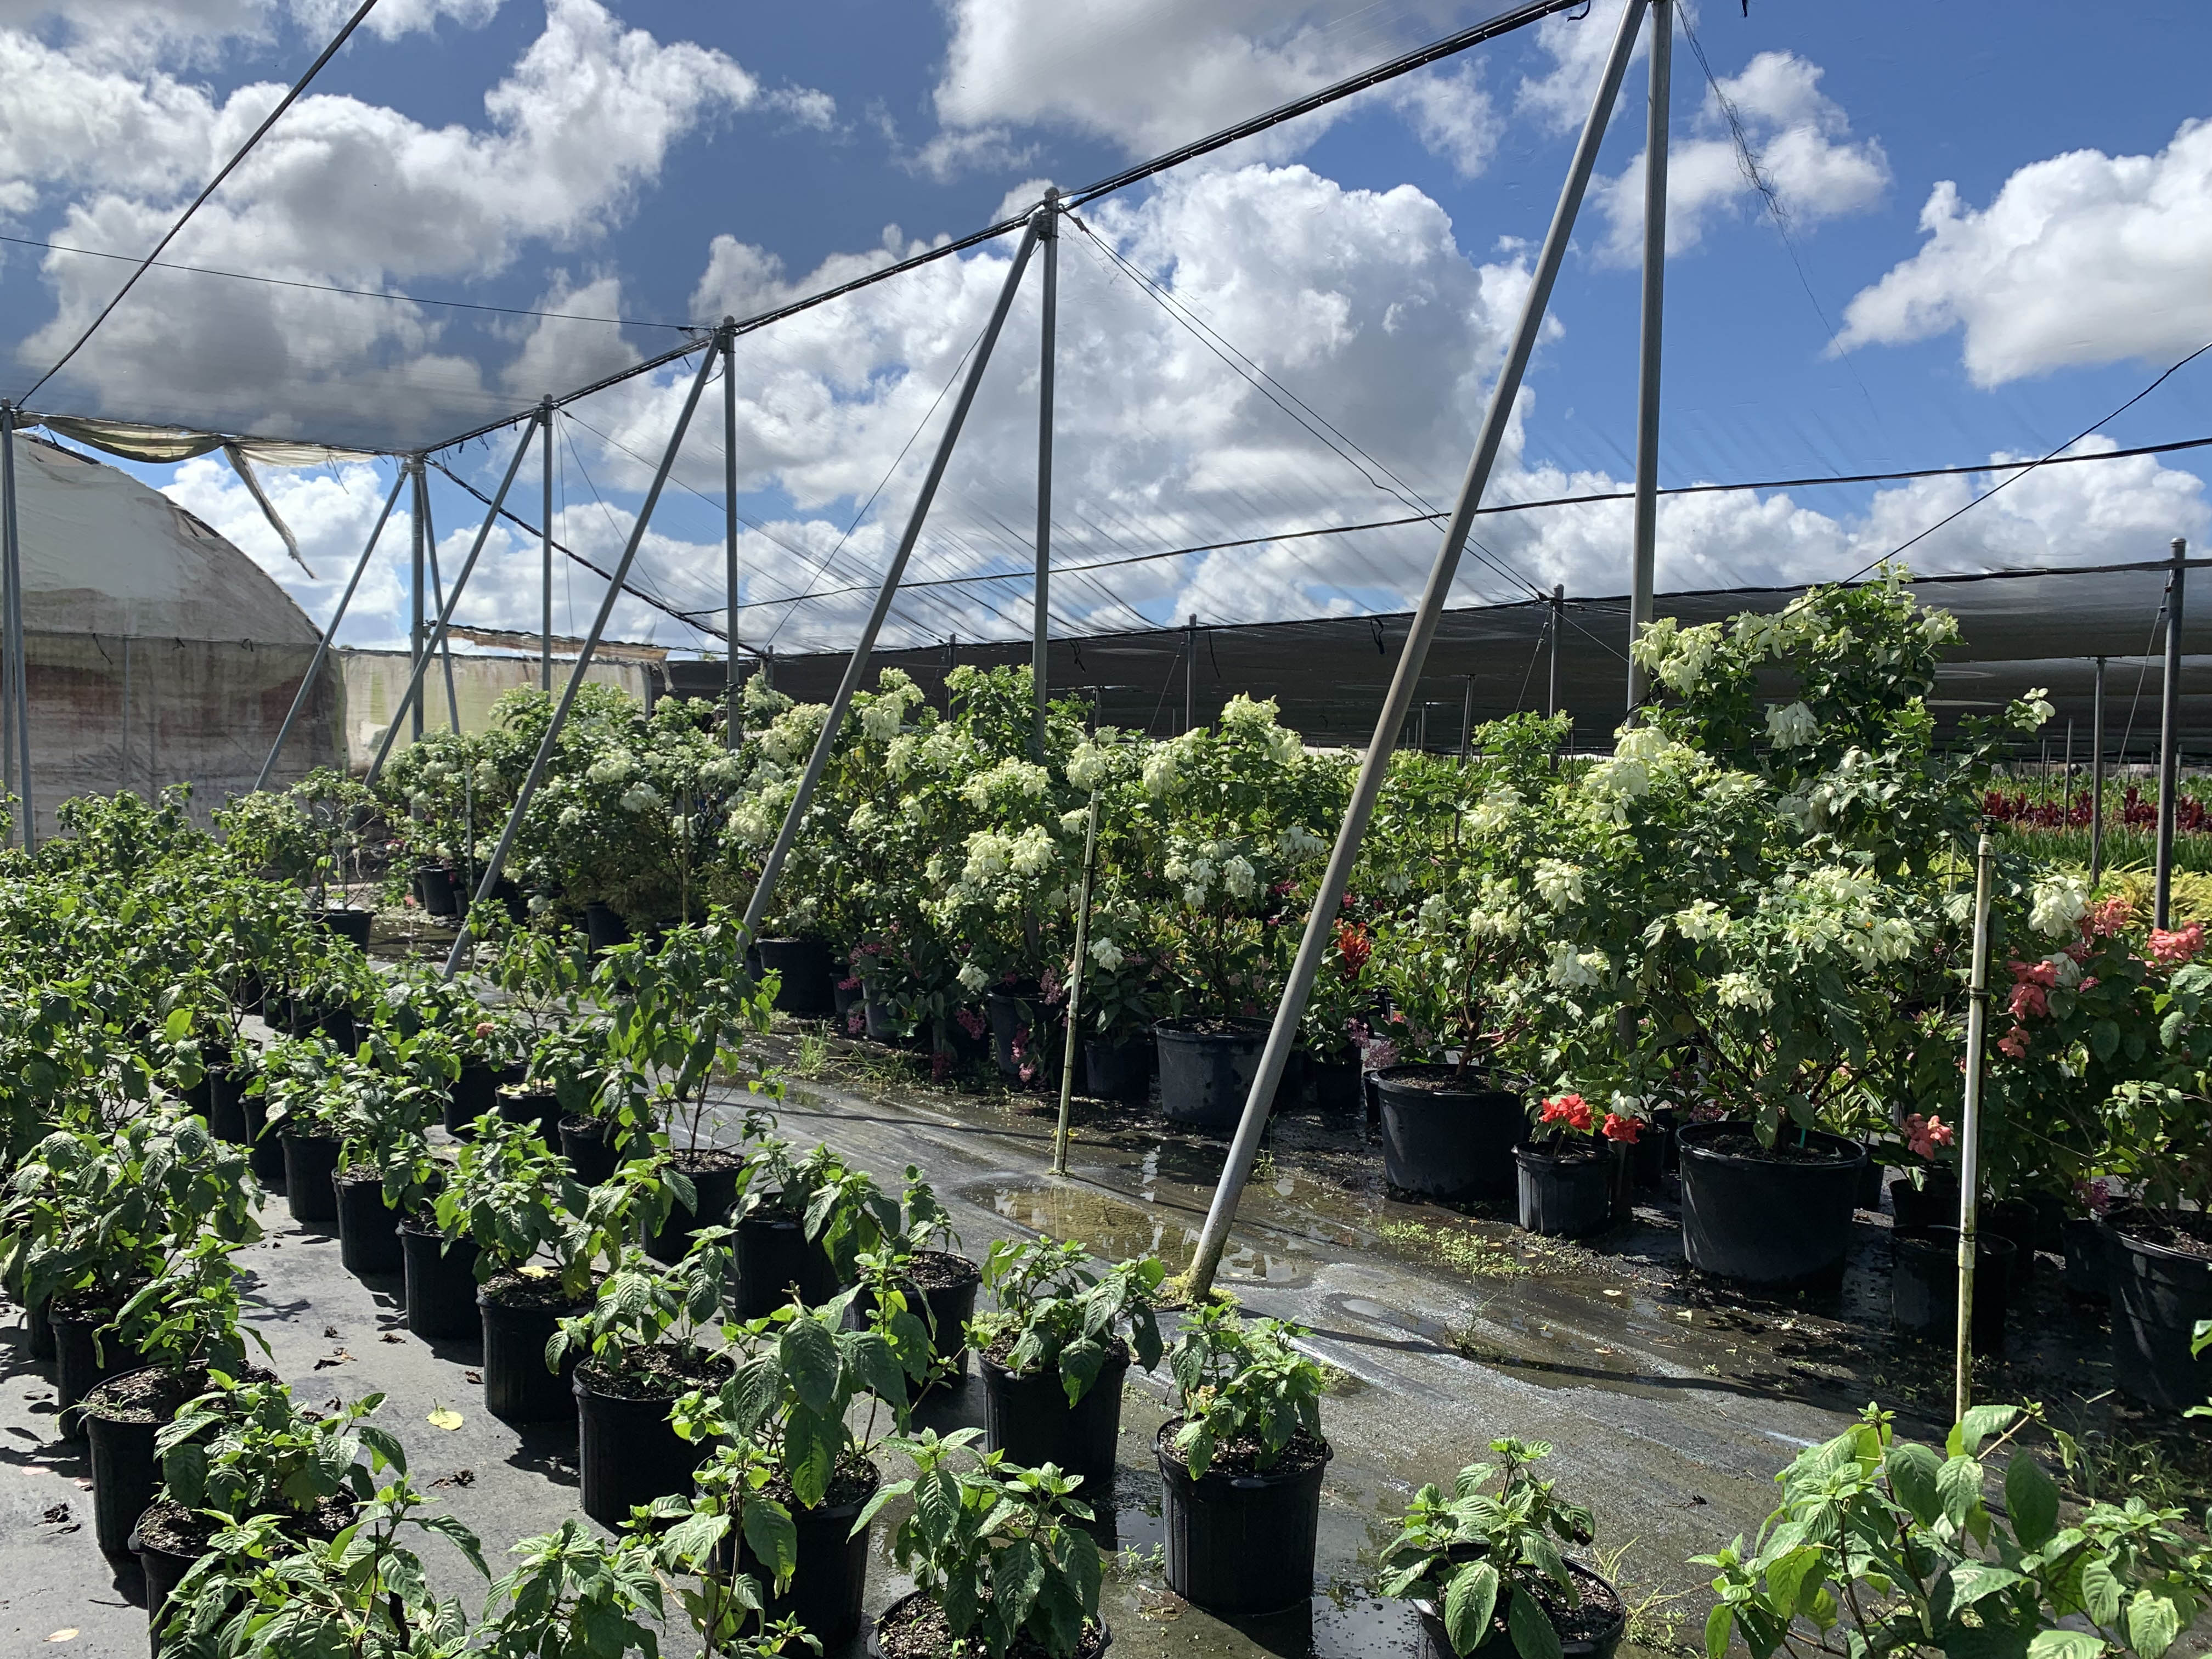 These Mussaenda are in full bloom on the right, but about ready to be cut back and stored for winter (on the left)